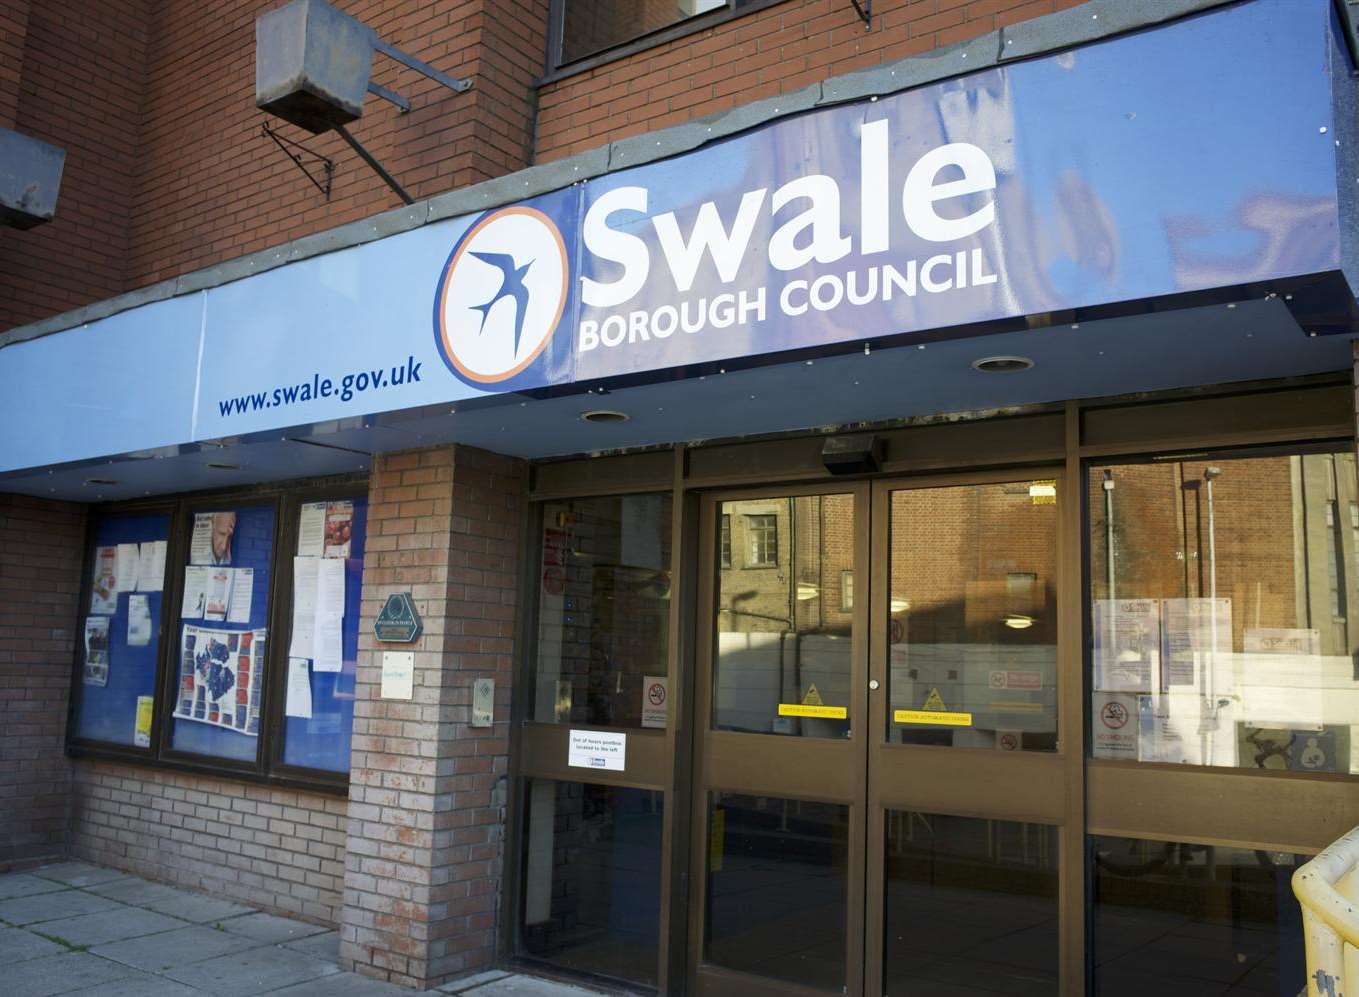 Swale council looked into the matter after residents raised concerns about the council tax increase